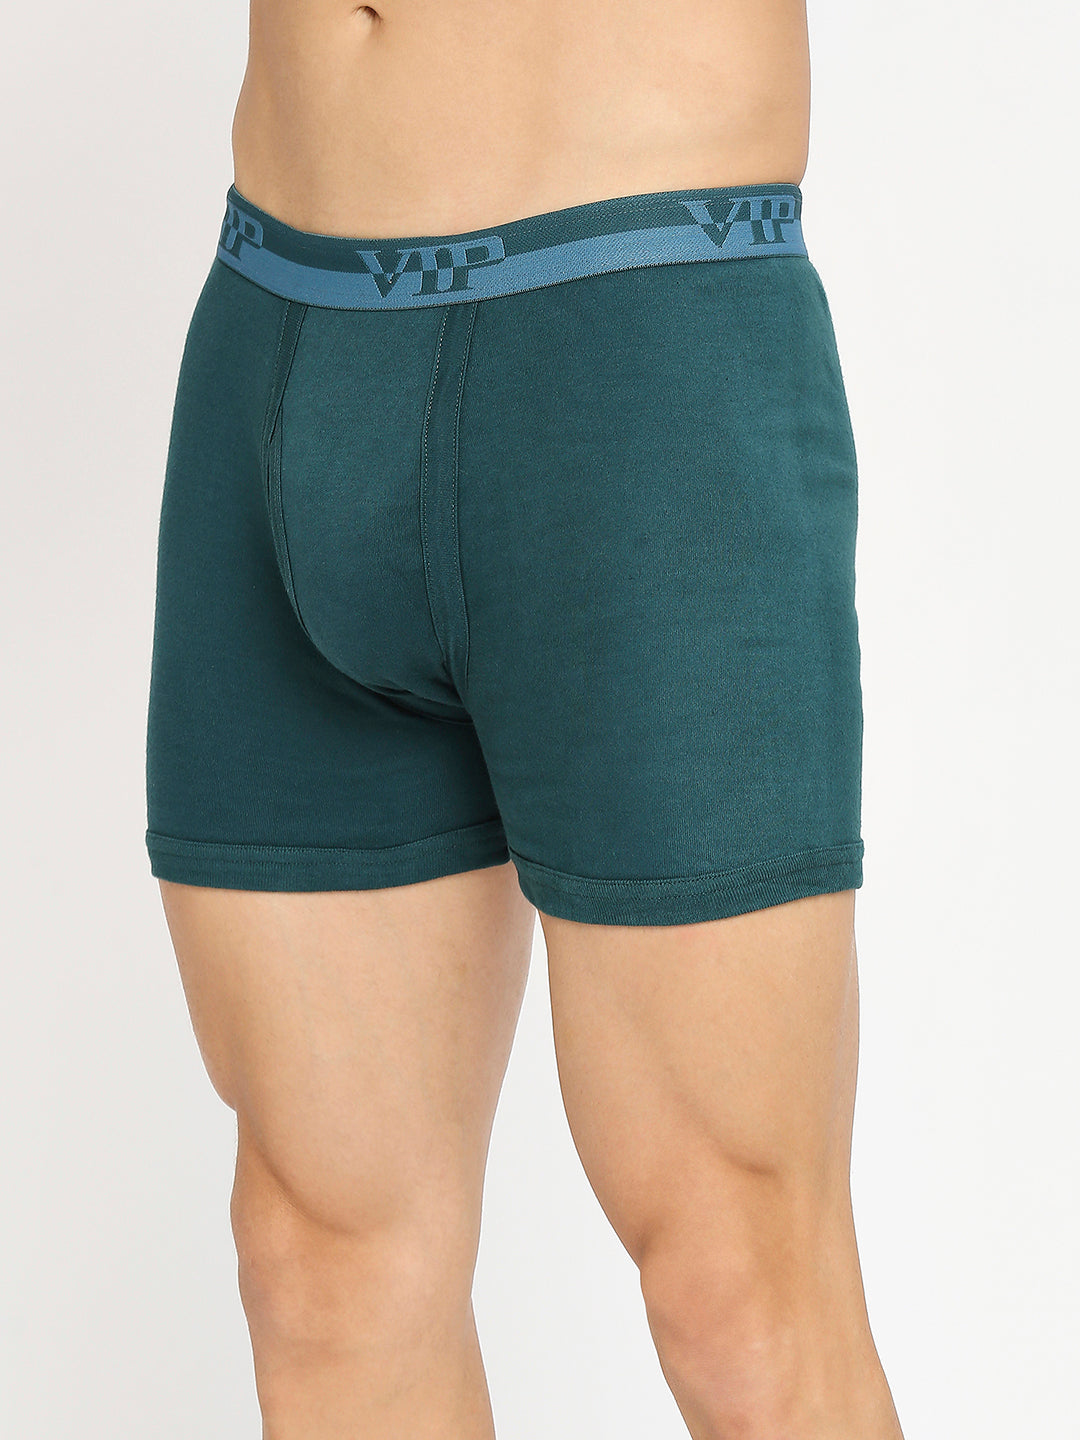 Trunks for Men  Buy Cotton Trunks Online in India at Best Price